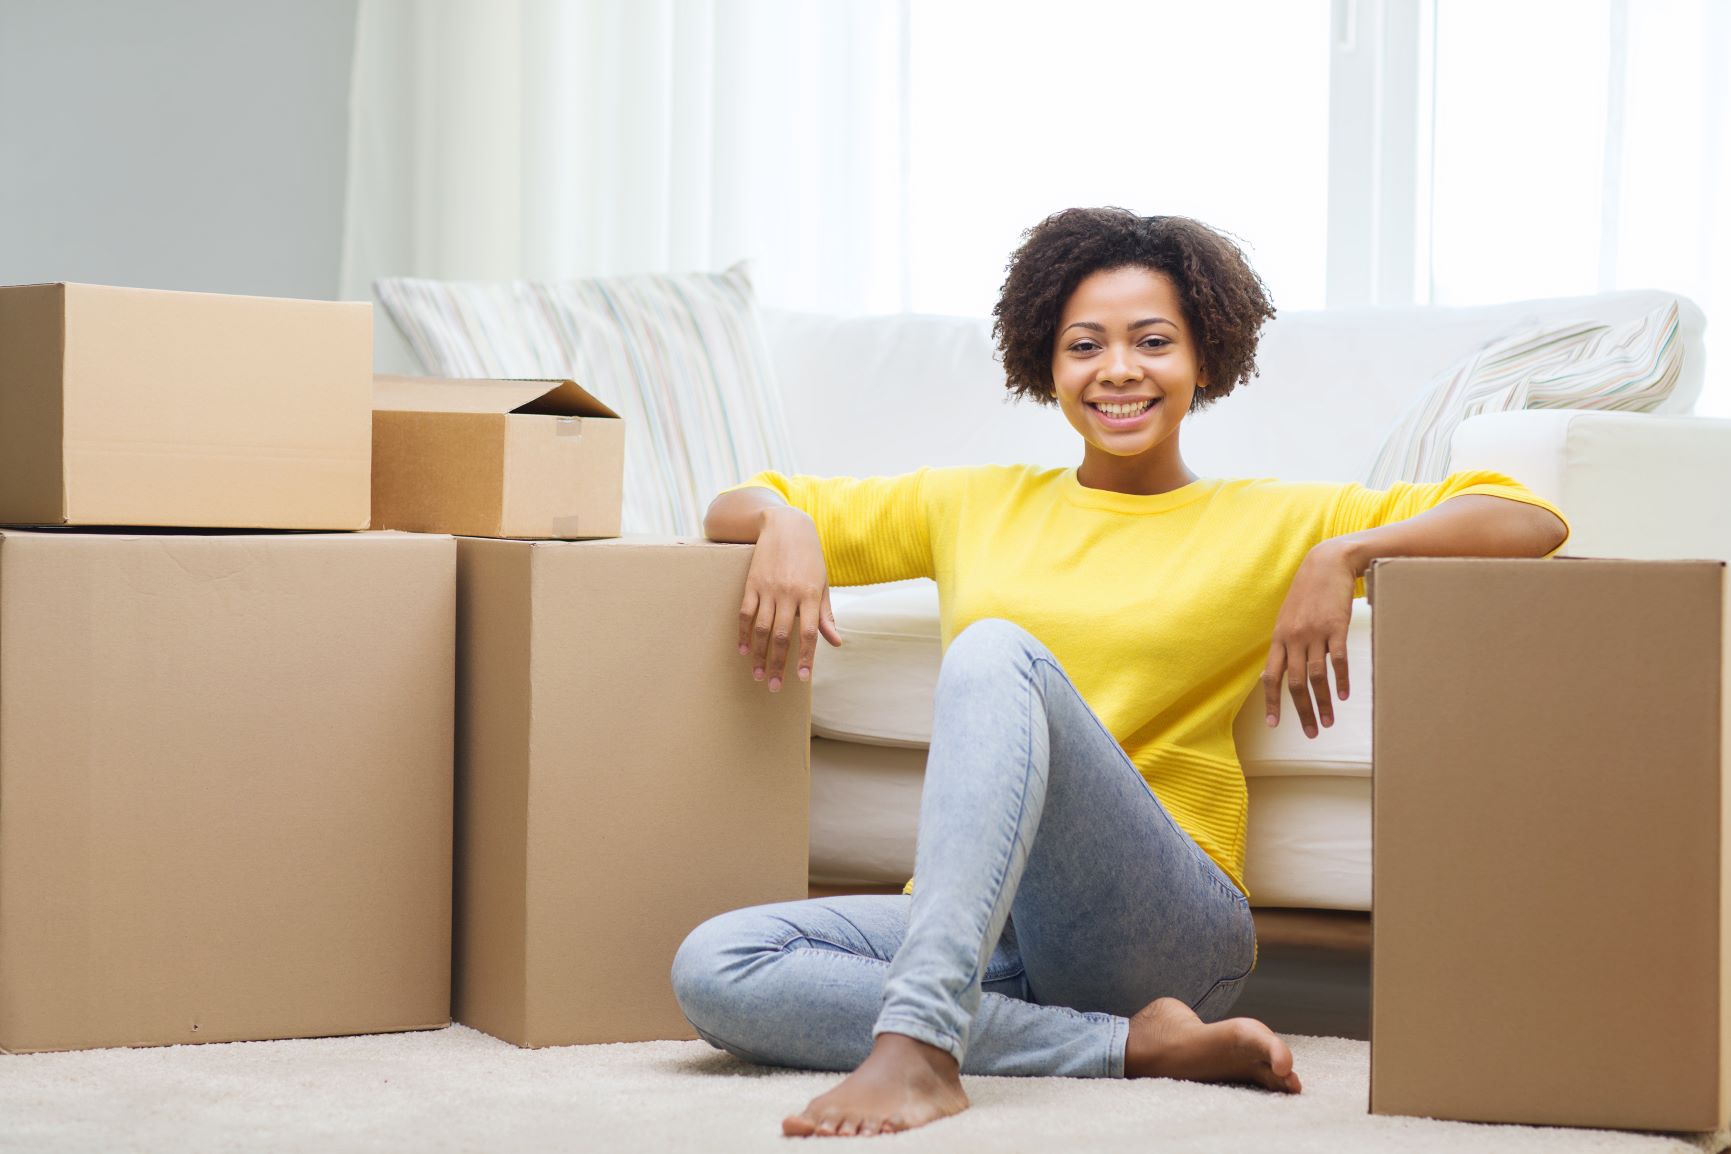 Woman Sitting by a couch and smiling while leaning against packed moving boxes